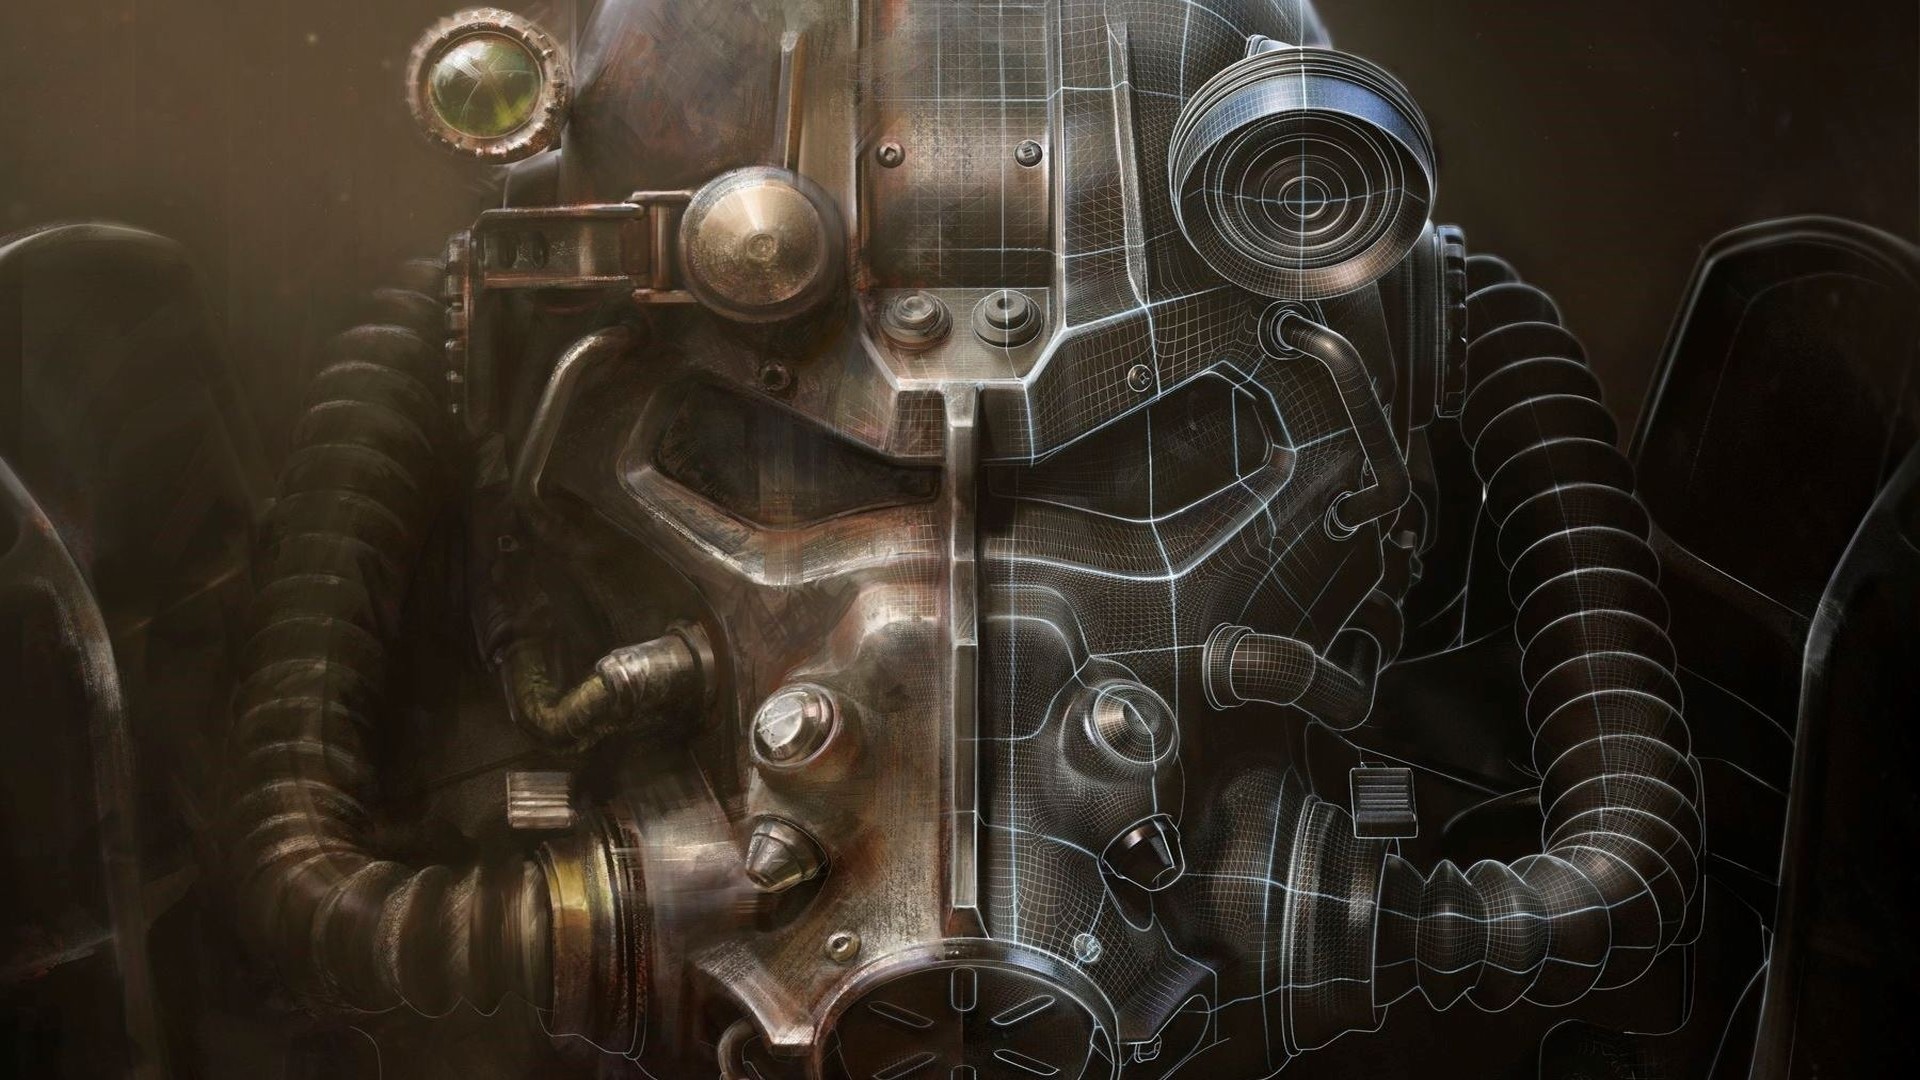 Fallout 4 Wallpapers